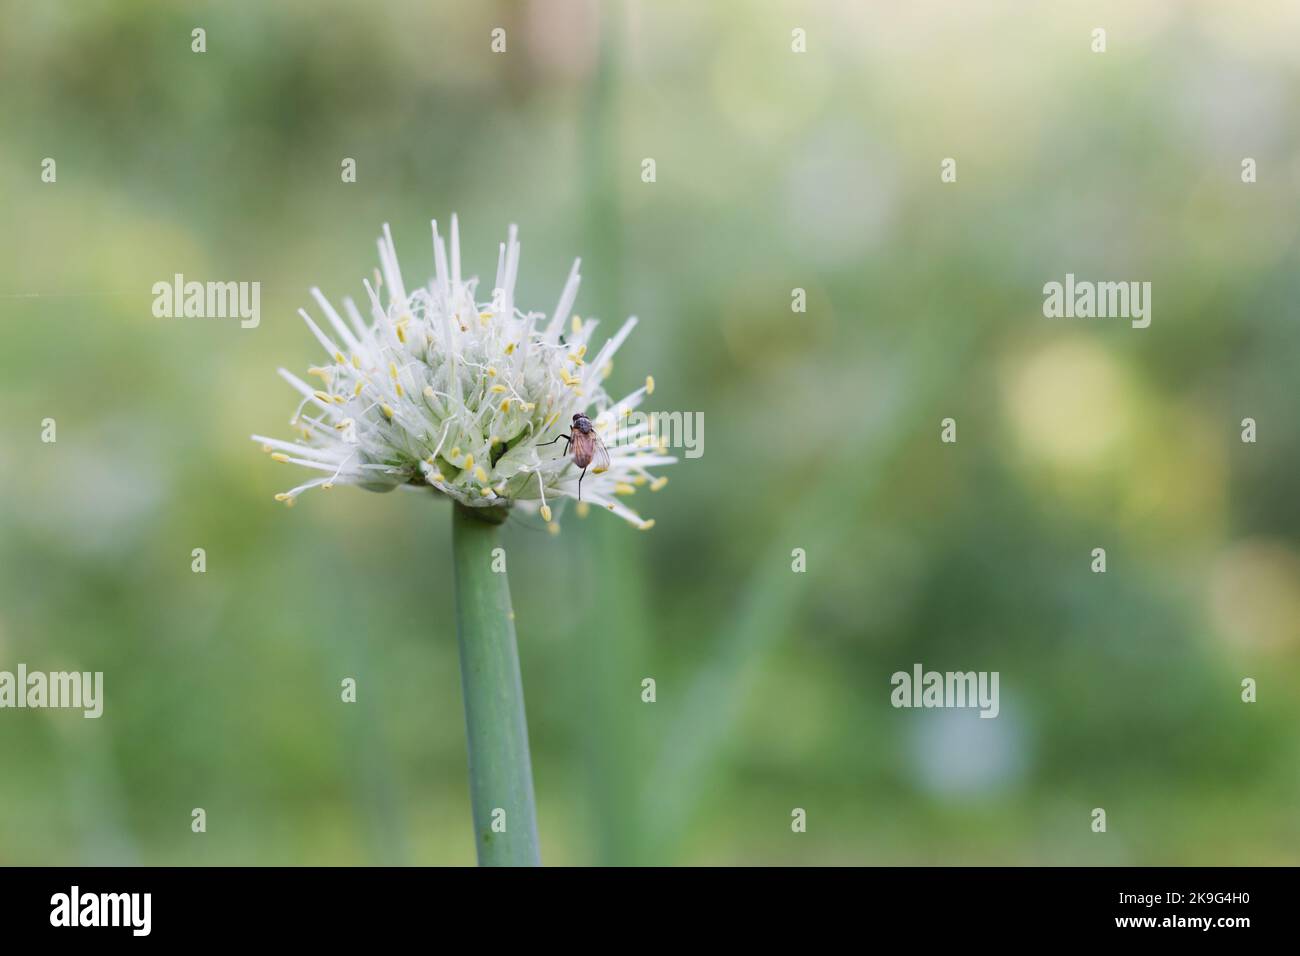 Fly sits on a growing leek Stock Photo